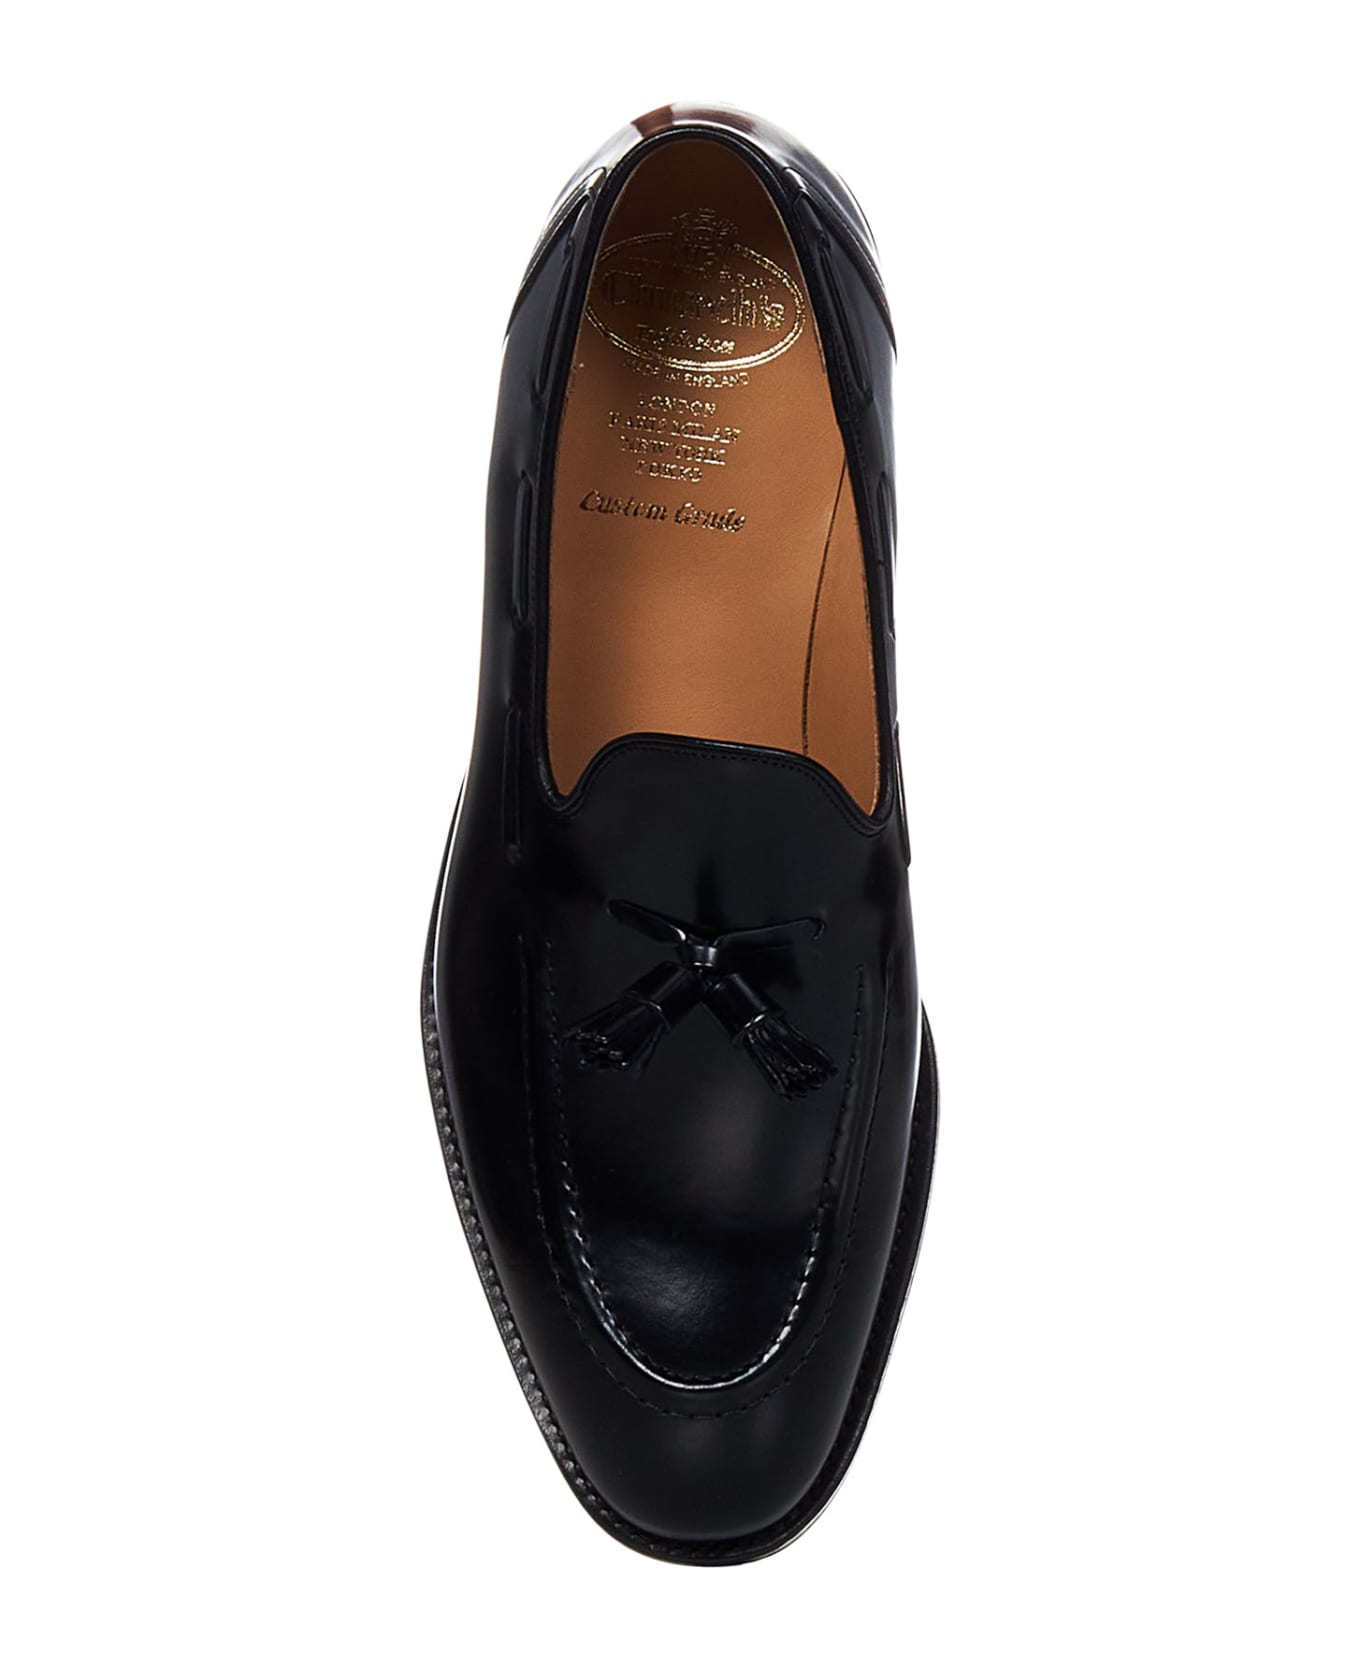 Church's Kingsley 2 Loafers - Black